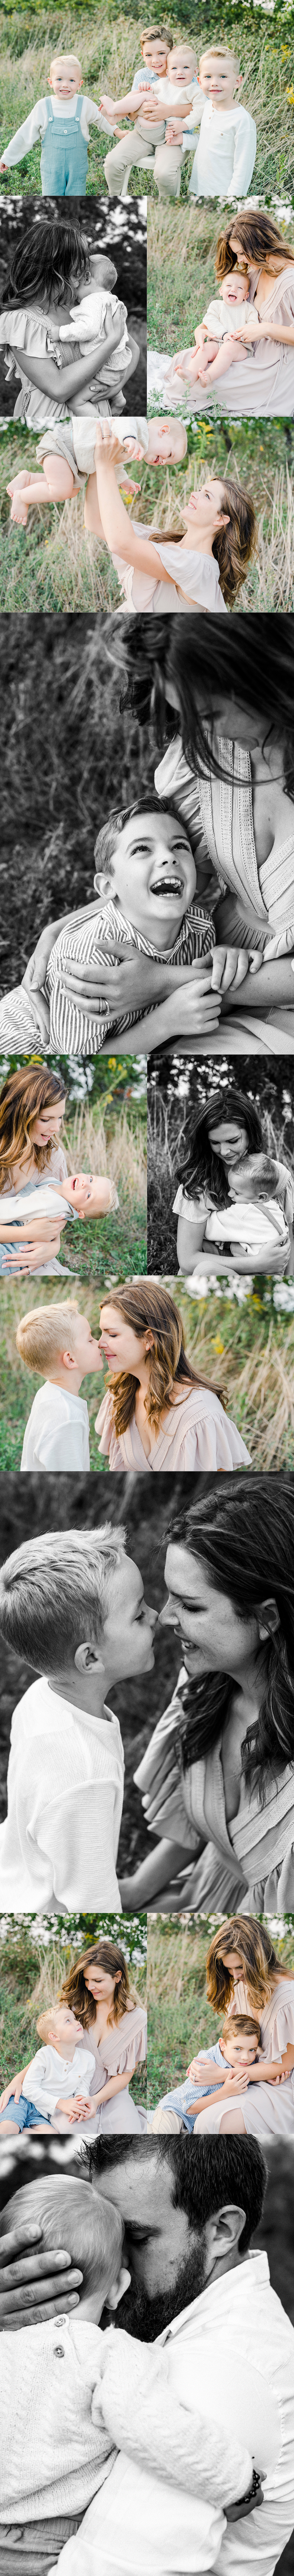 beautiful outdoor family session at sunset